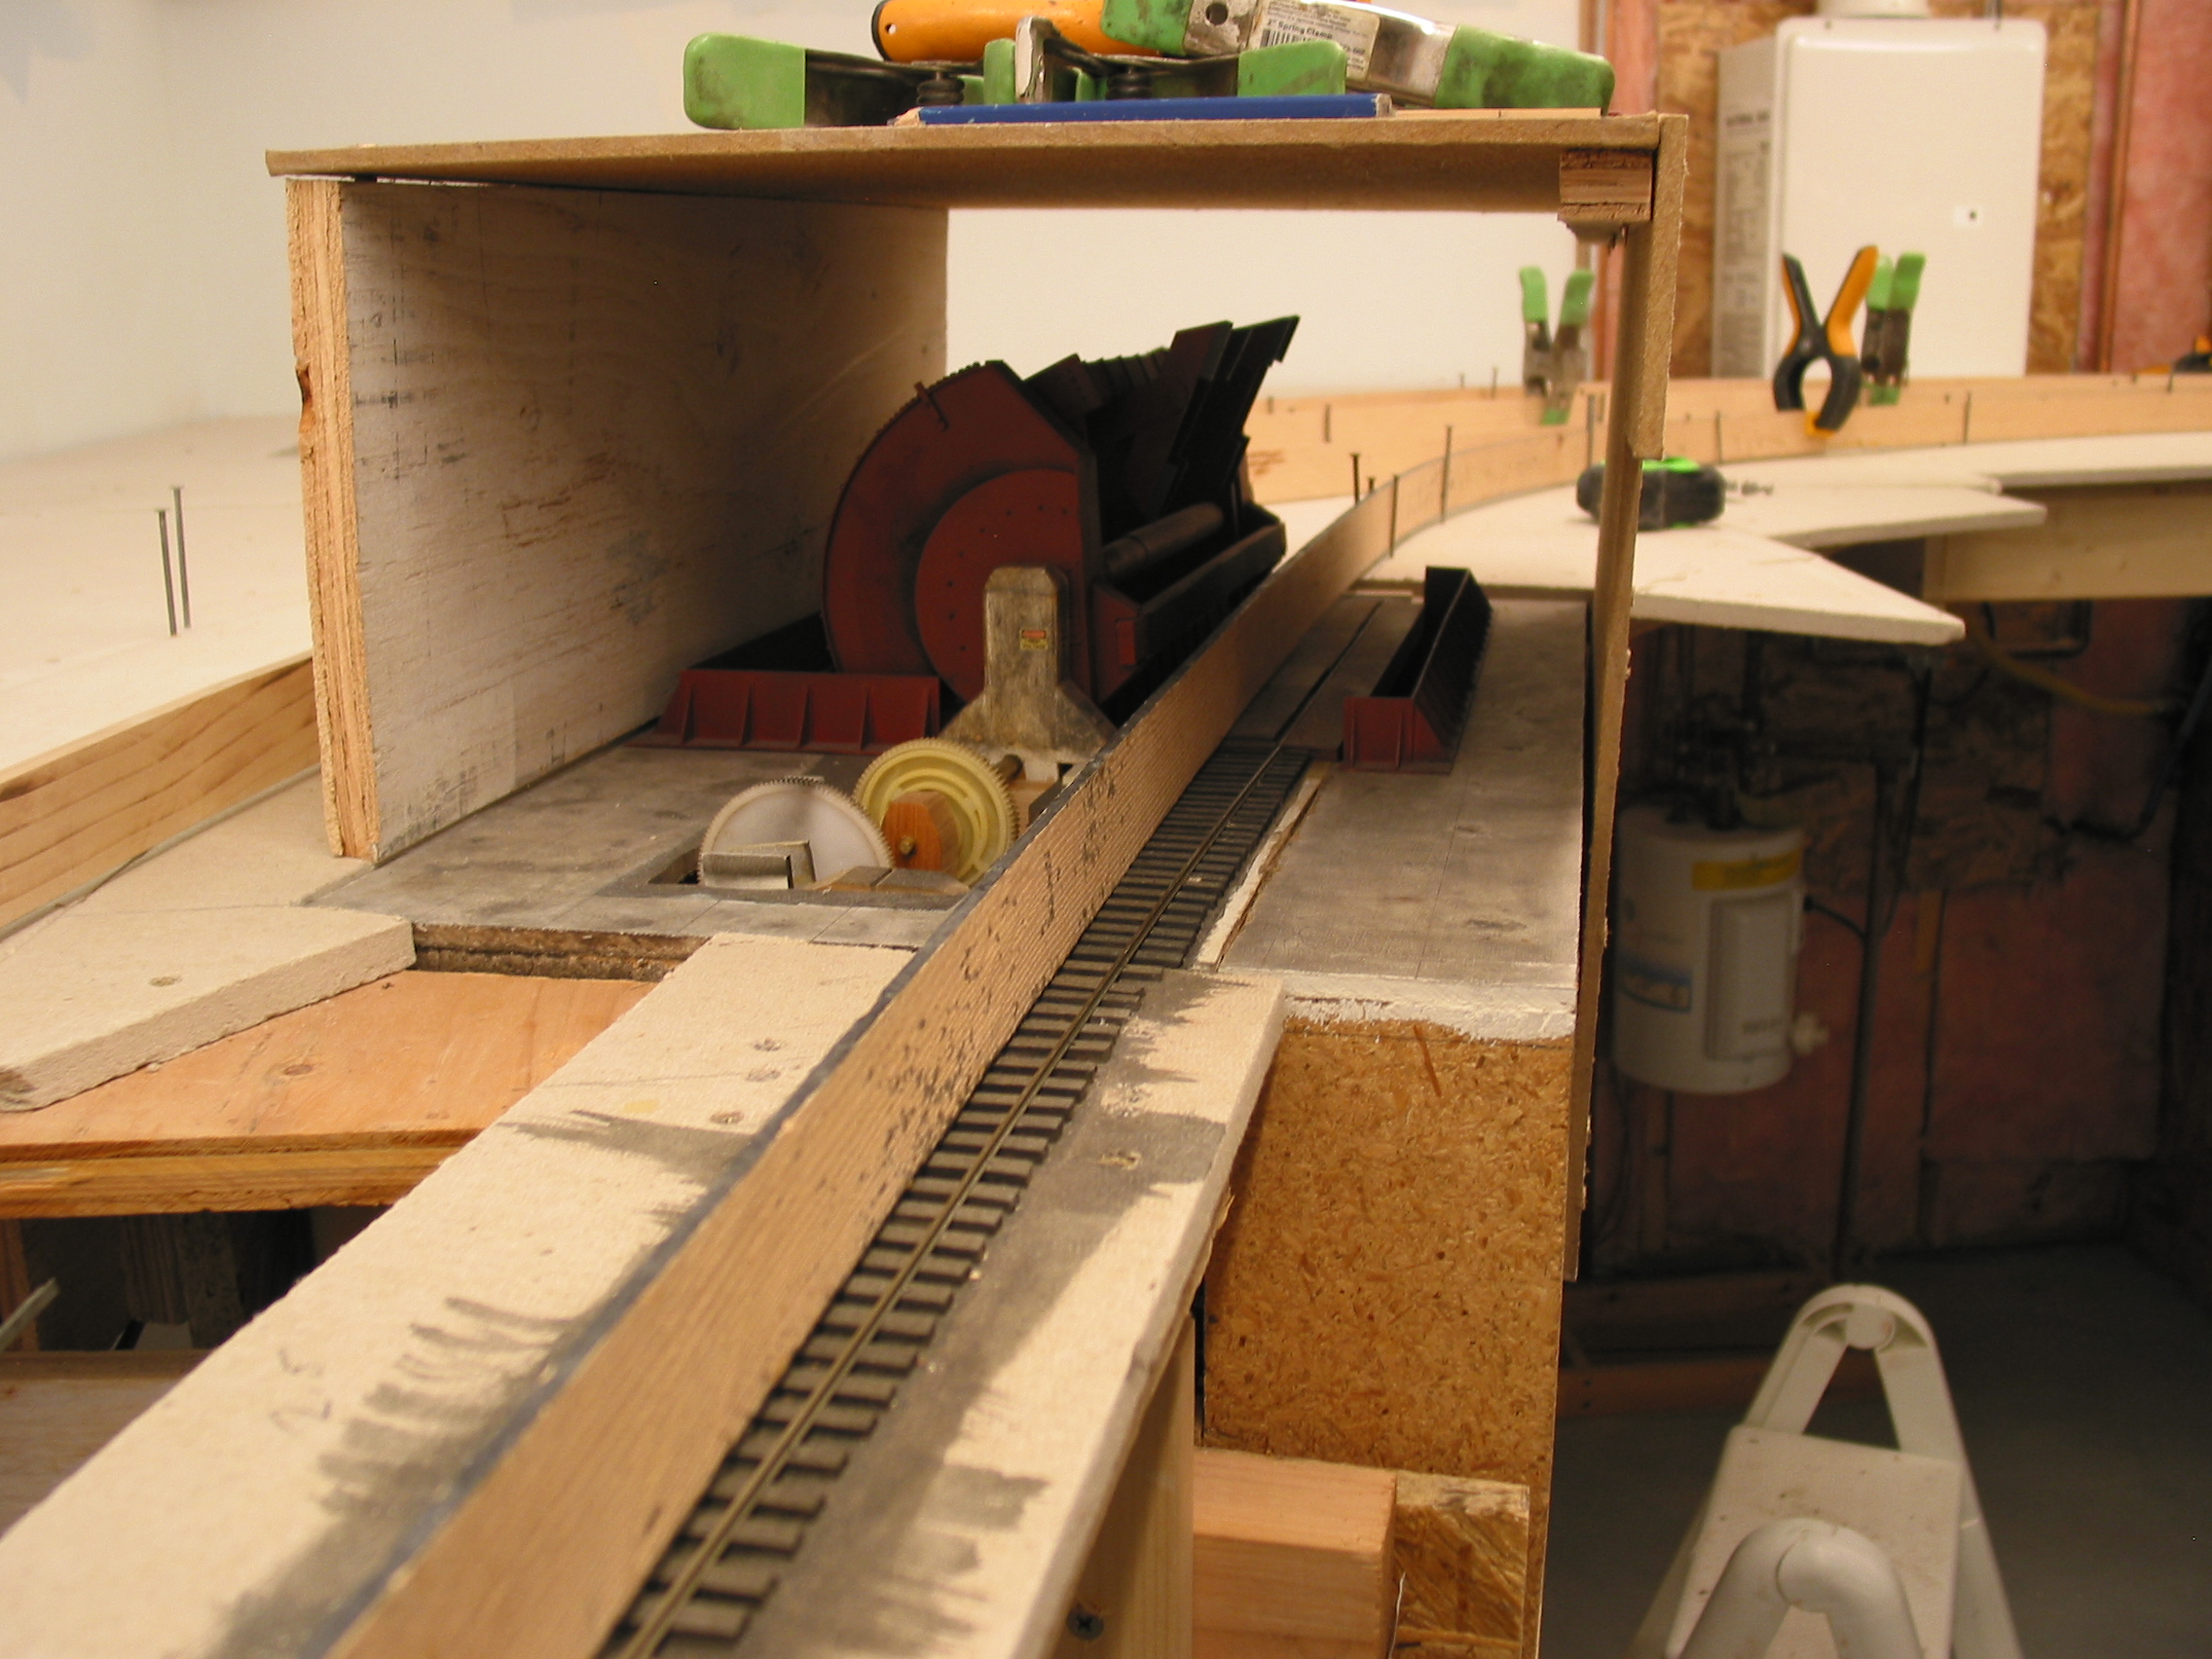  Splines were used to align the rotary trackage with the empties track. A slight grade automatically pulls the hoppers away as the next hopper is placed for dumping. 